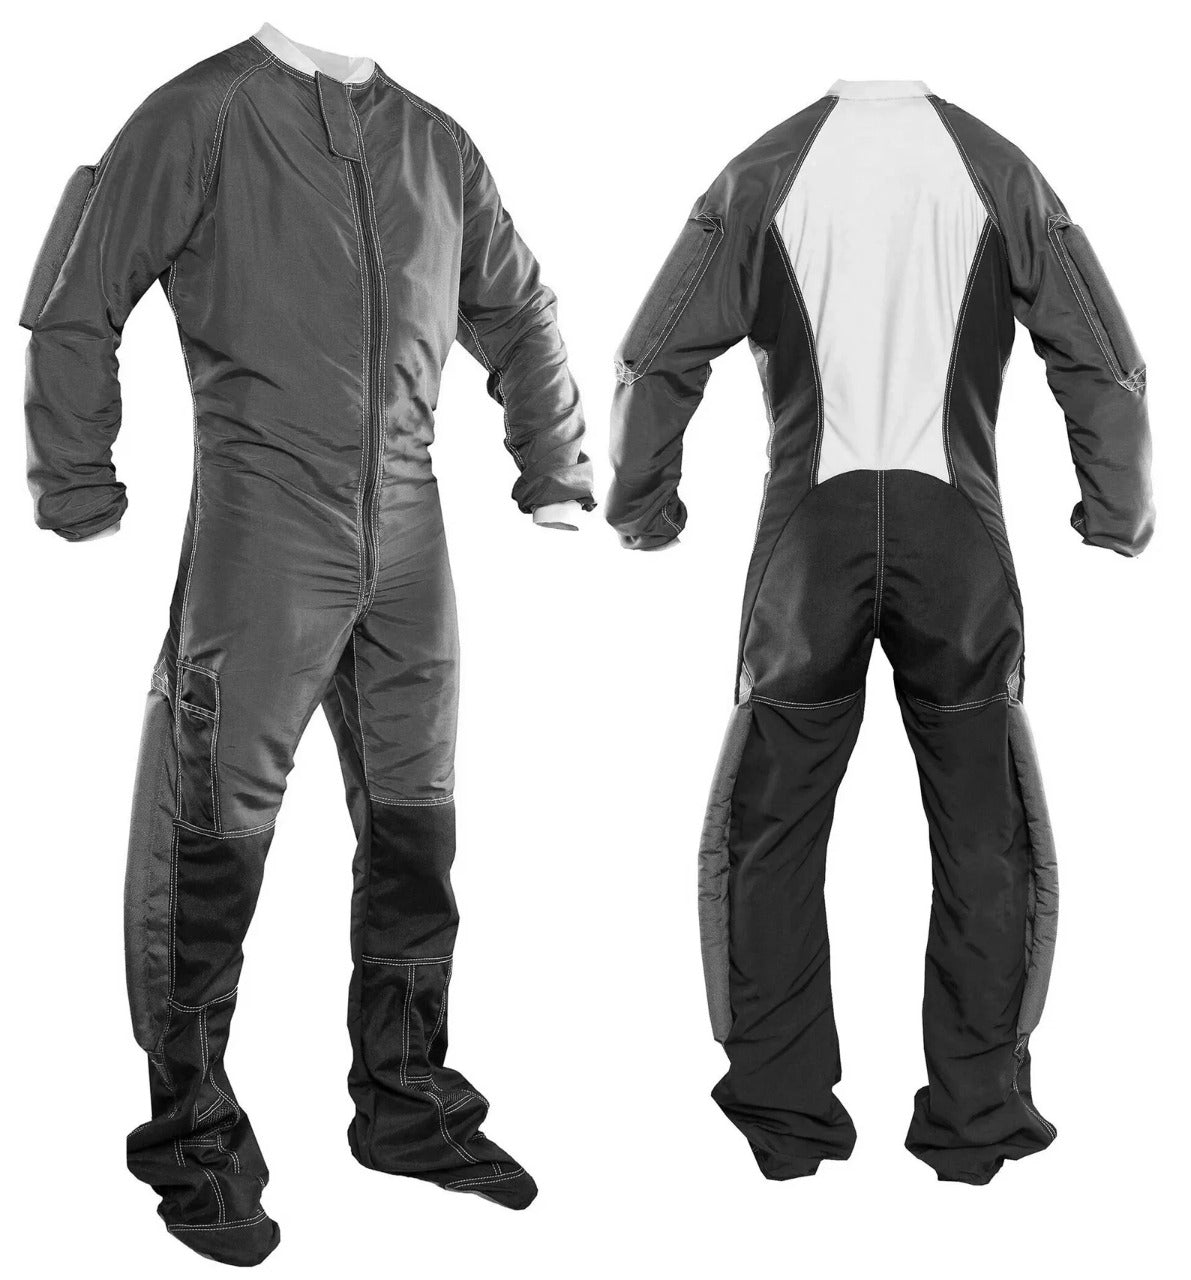 Skydiving Formation Suit, rw loose fit suit, Gripper Suit, Belly Flying Suit, Freefly jumpsuit-03